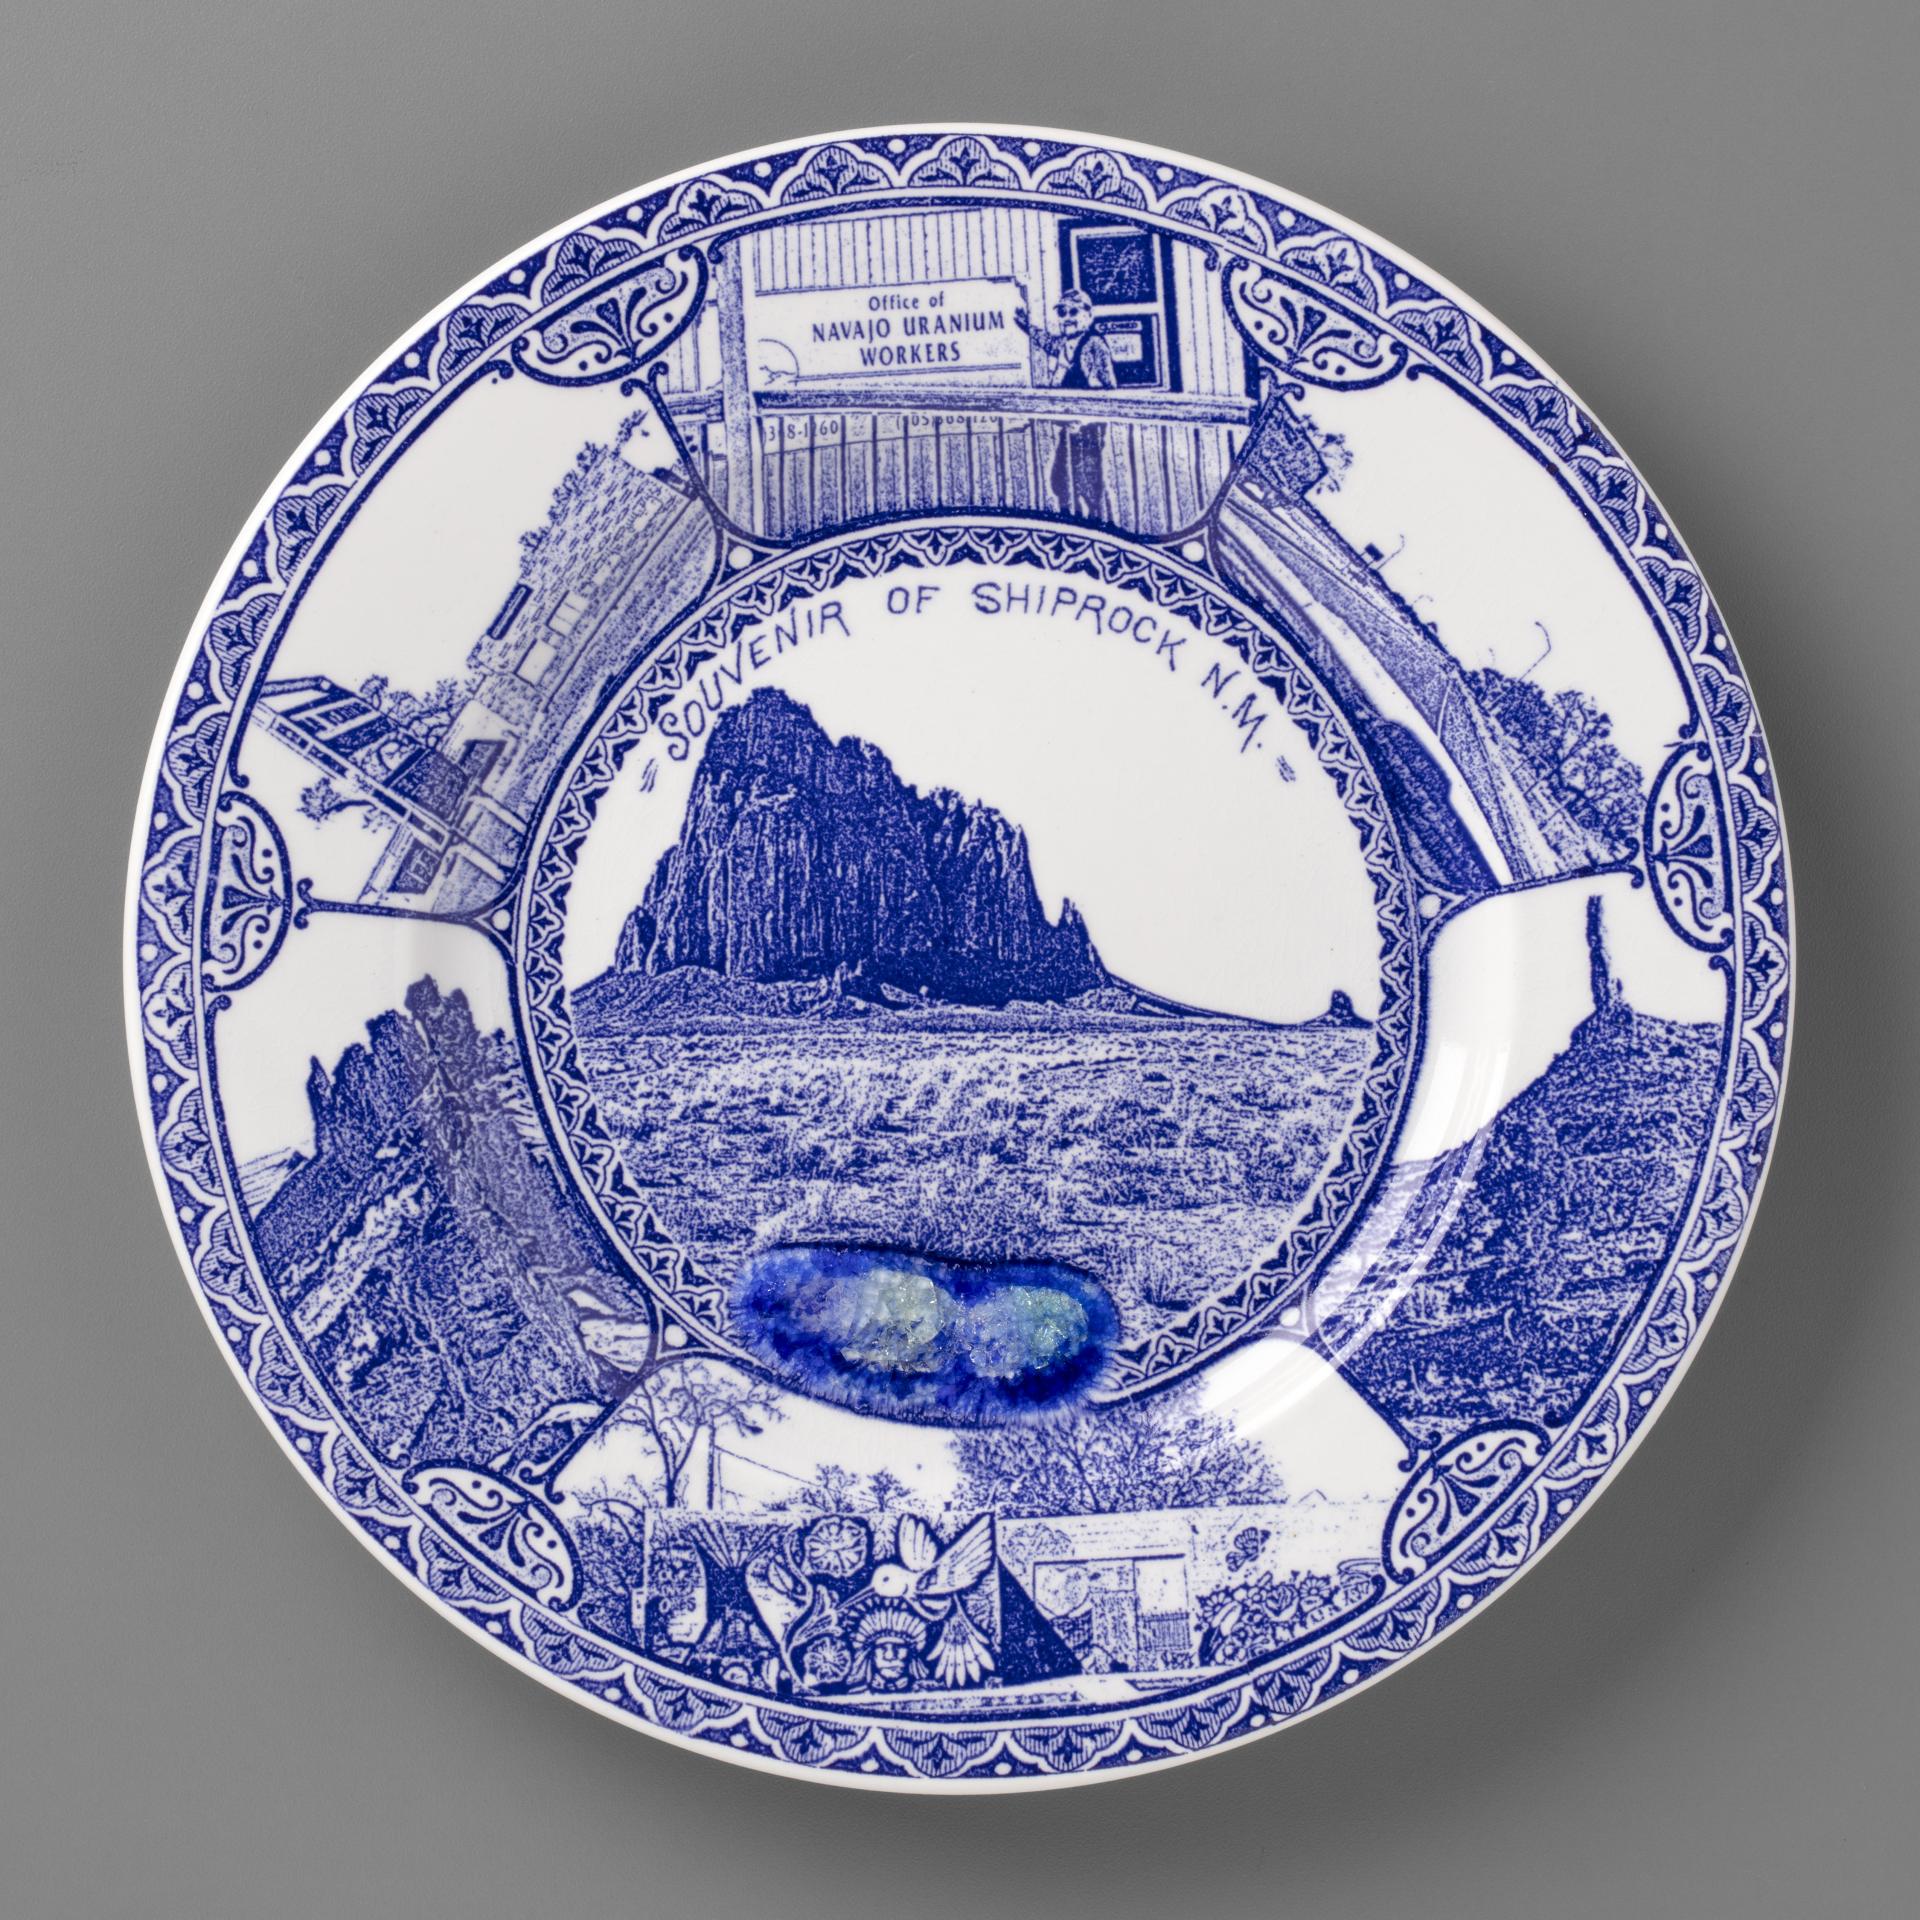 blue and white transferware plate depicting a scenes near Shiprock, NM